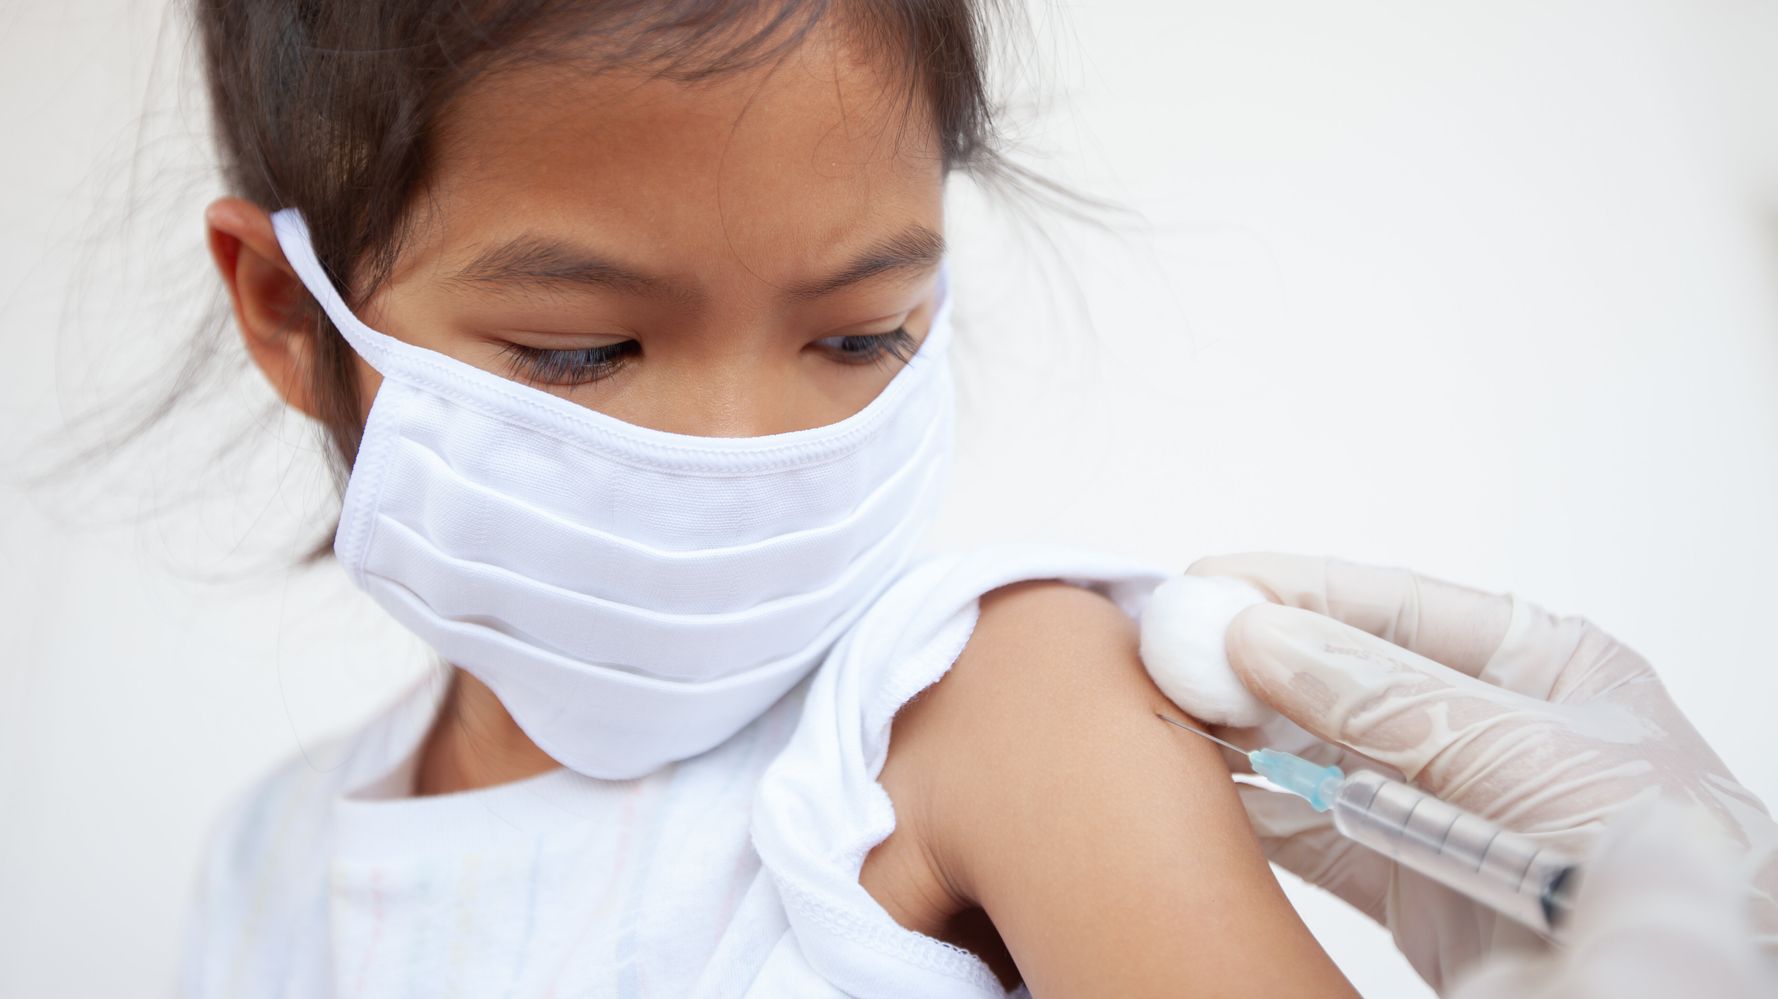 We're All Waiting For A COVID-19 Vaccine. For Kids, The Wait May Be Much Longer.